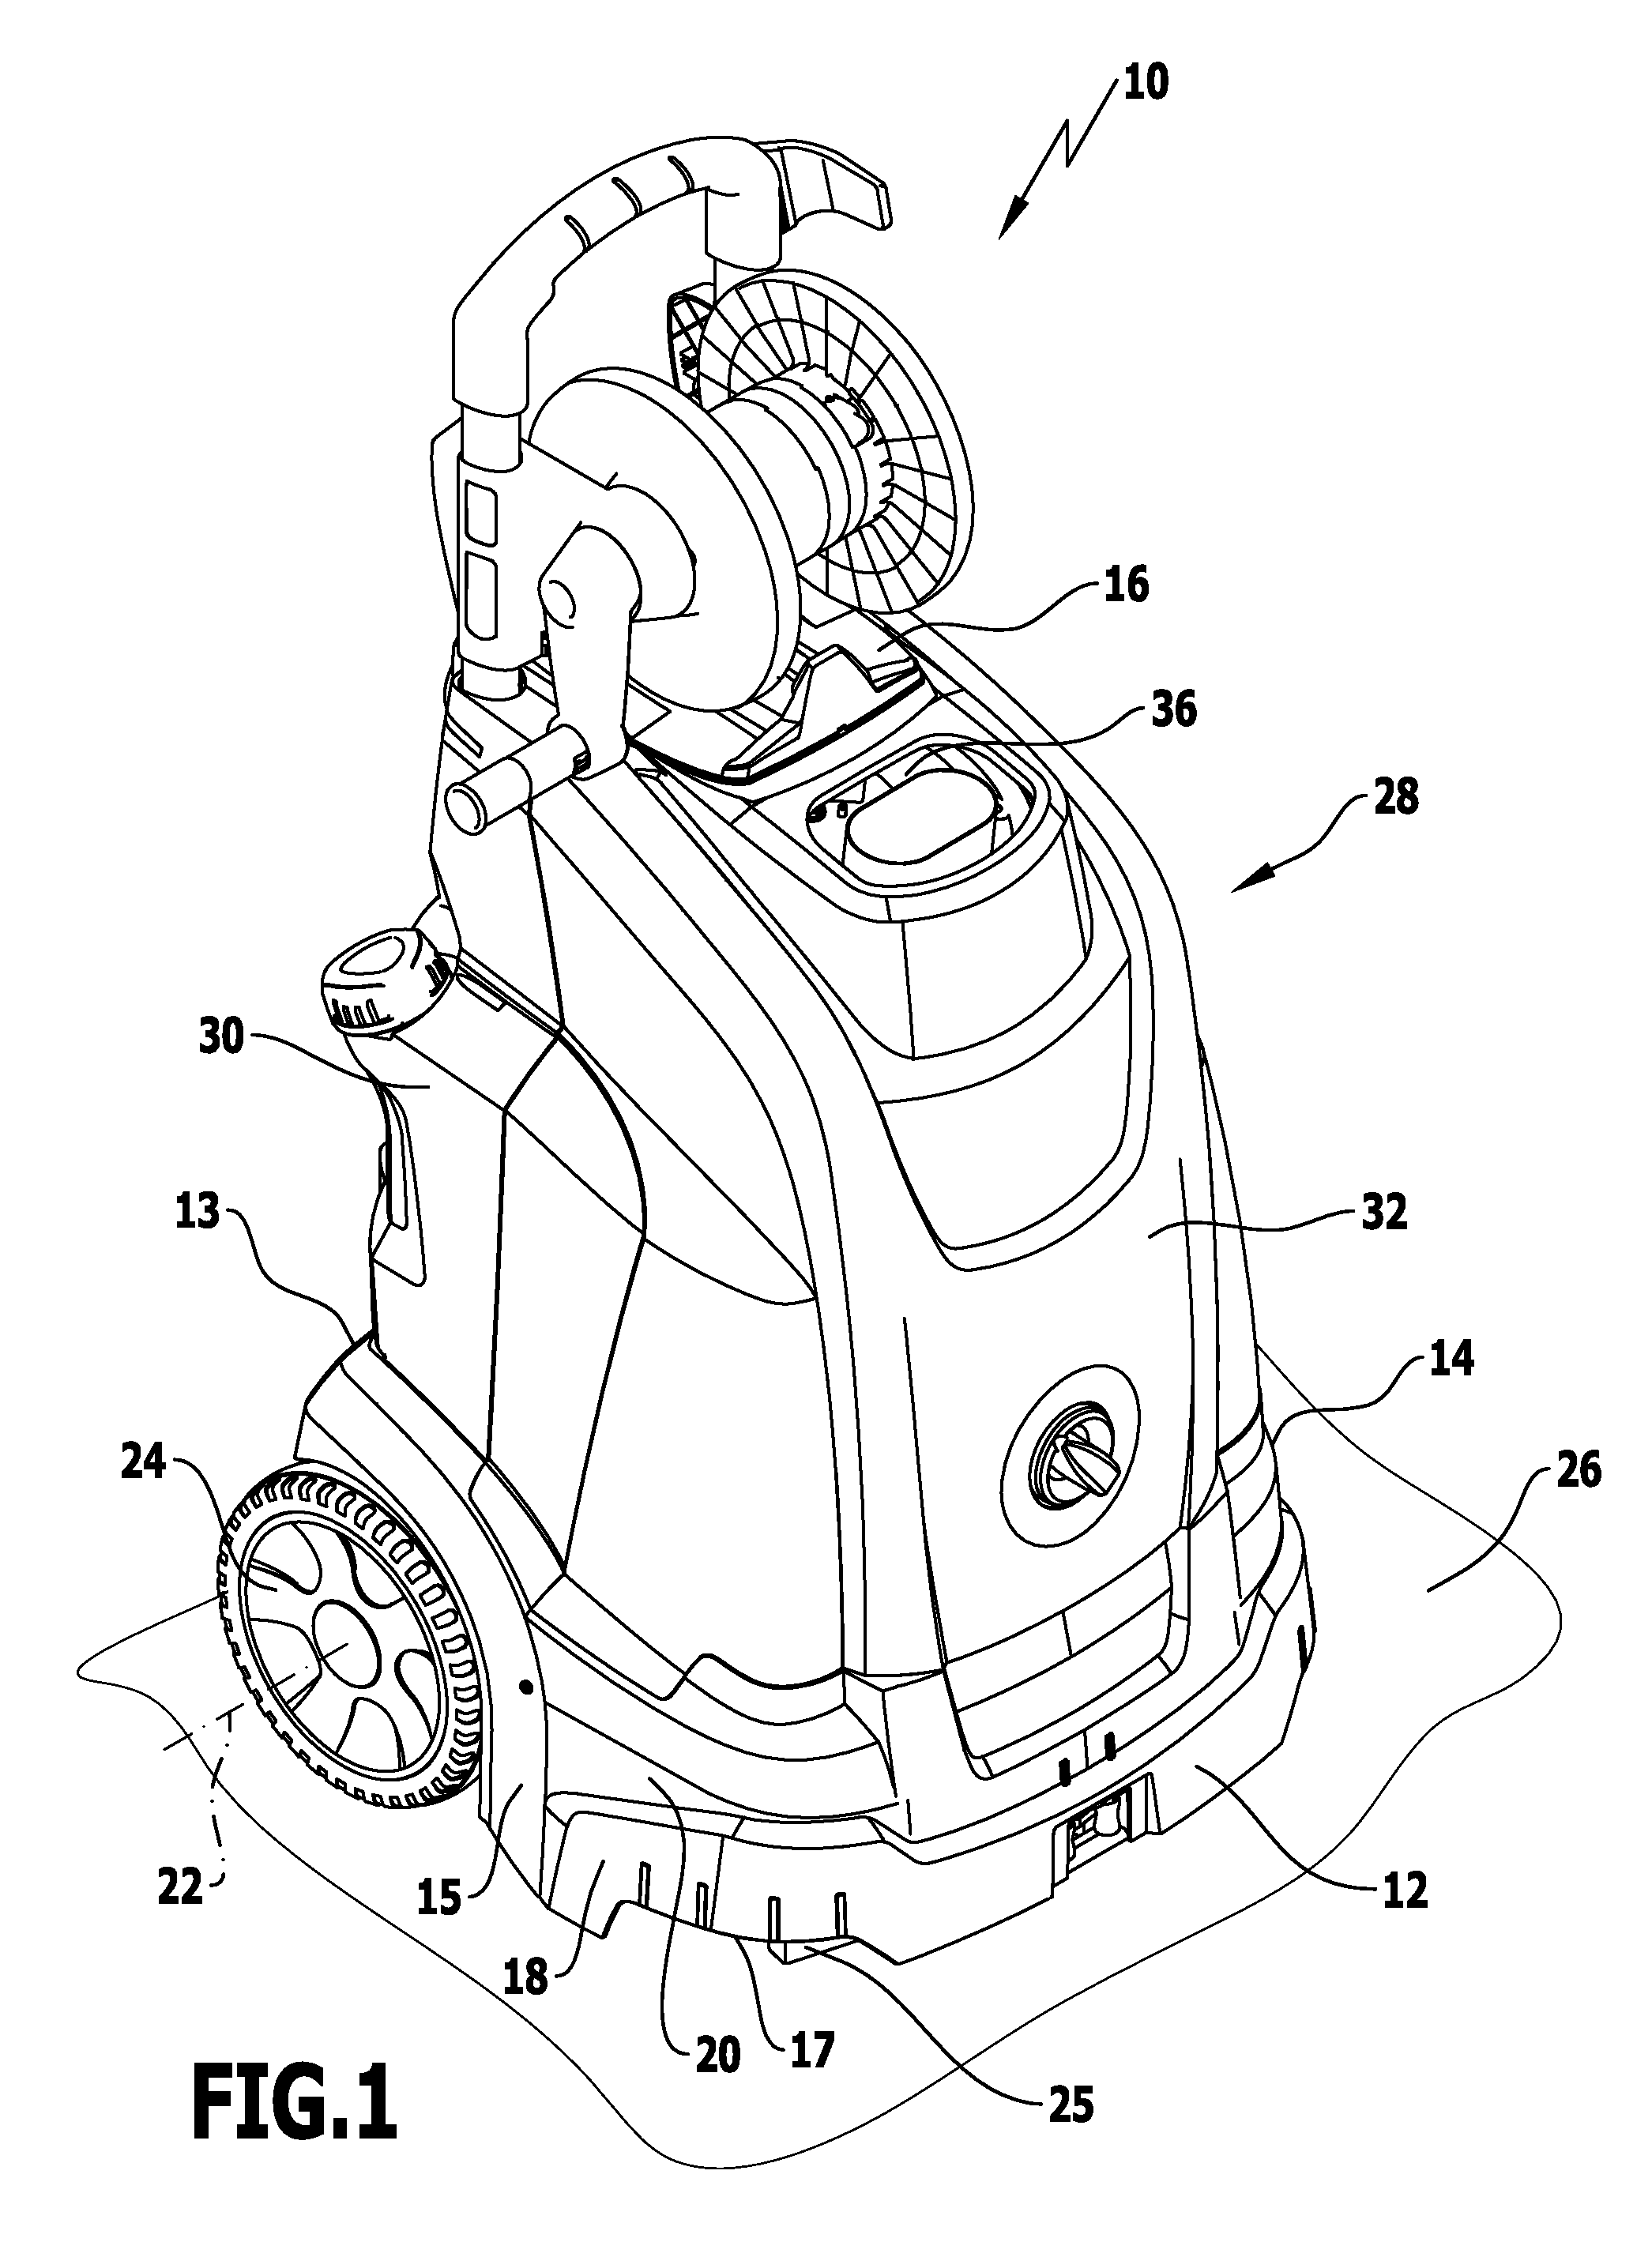 High-pressure cleaning appliance with movable channel constriction section